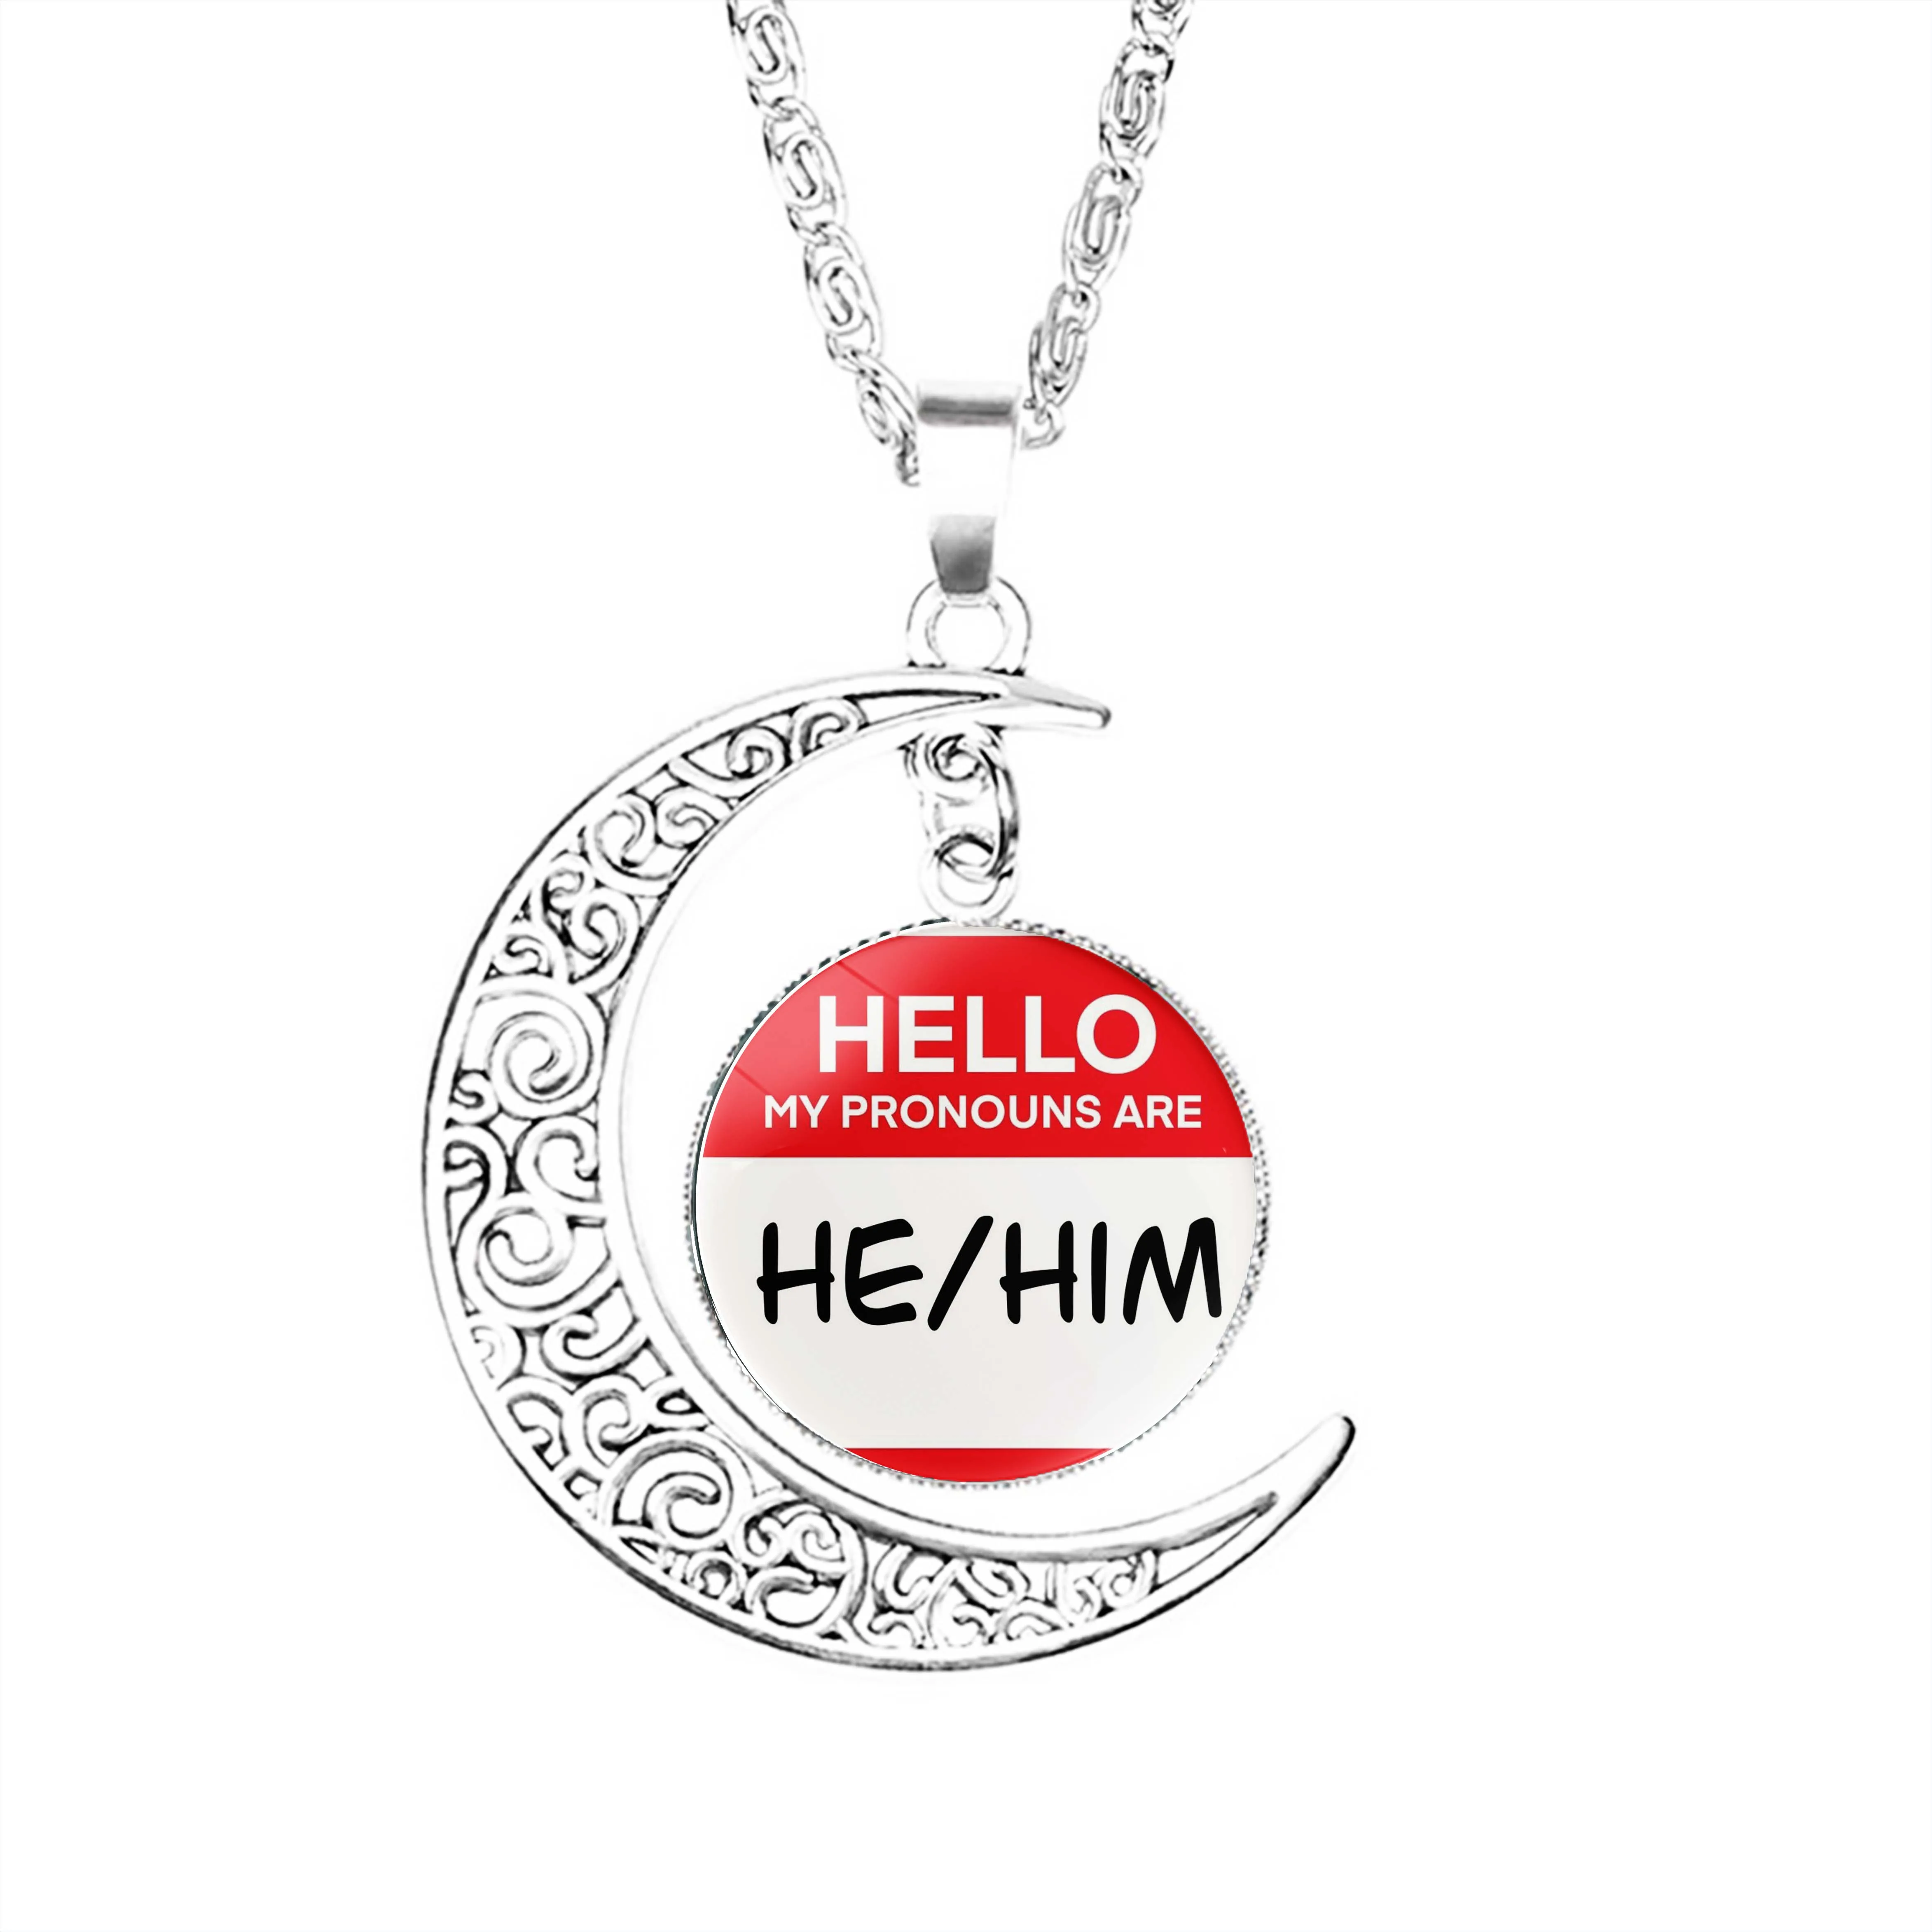 

He Him Pronouns Tag Moon Necklace Women Gifts Jewelry Dome Boy Lovers Lady Pendant Glass Crescent Charm Accessories Party